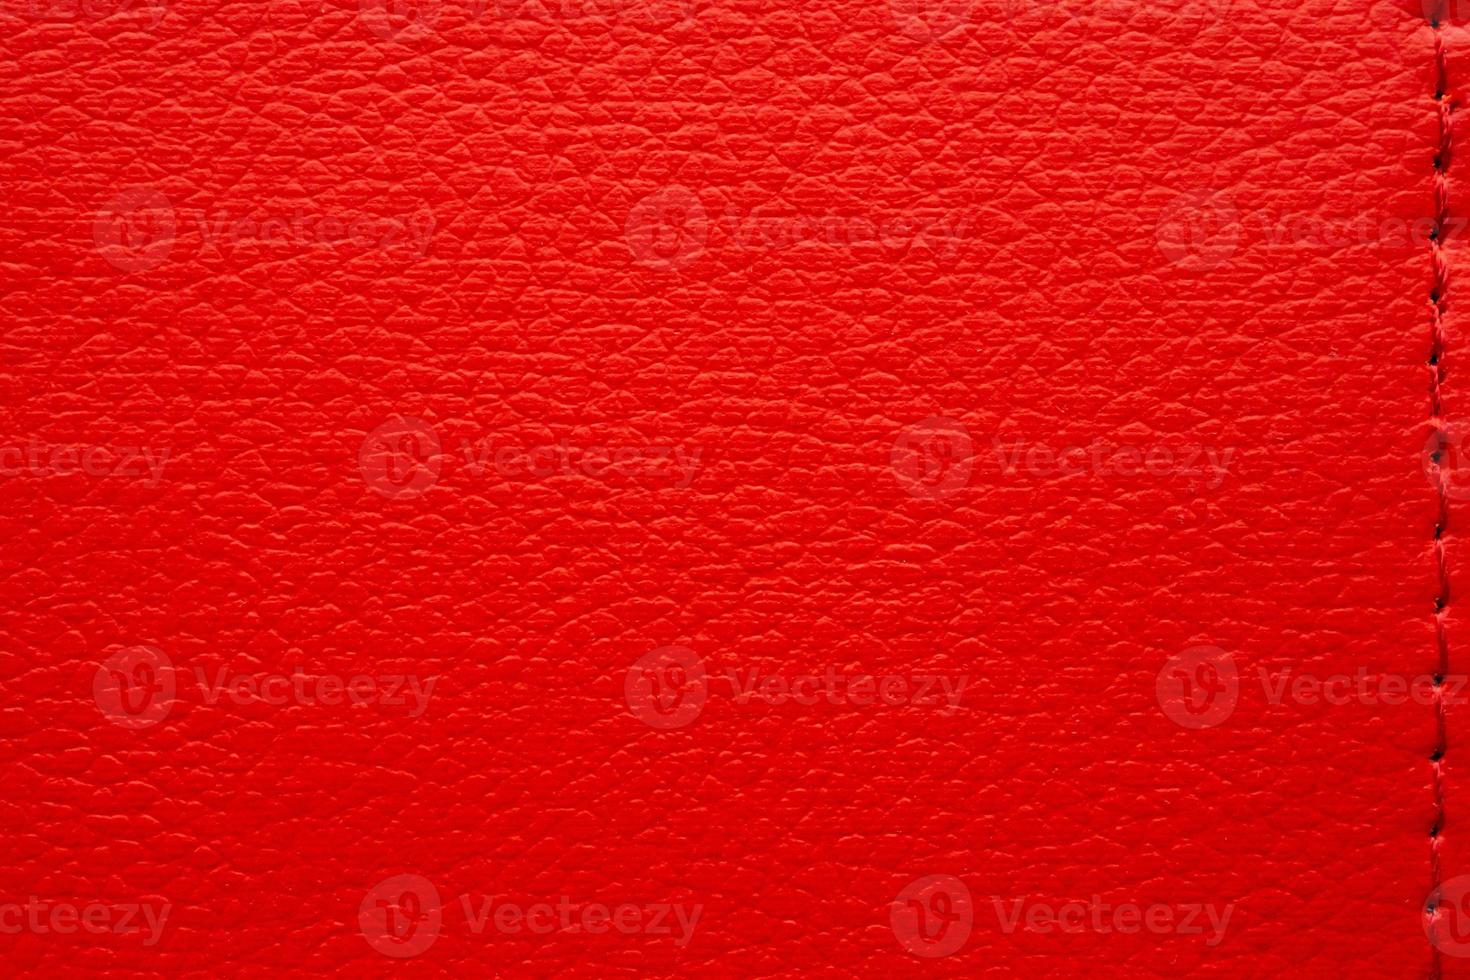 Vintage red leather texture luxury background photo